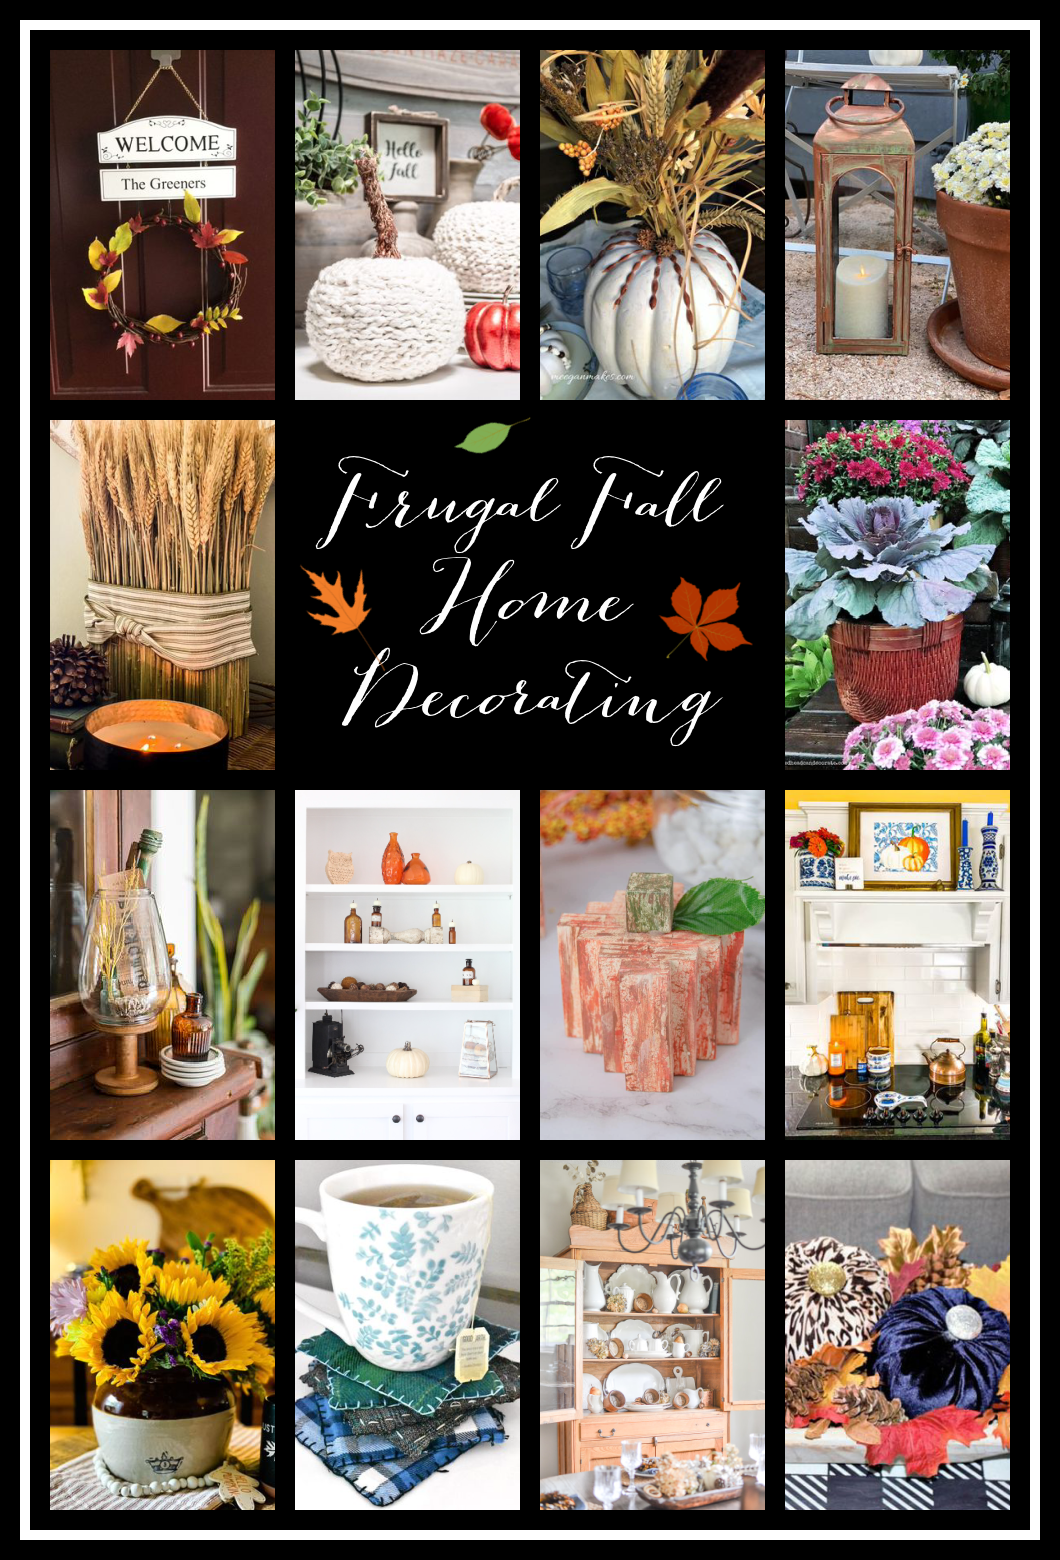 3 Thrifty Fall Planter Cover Ideas